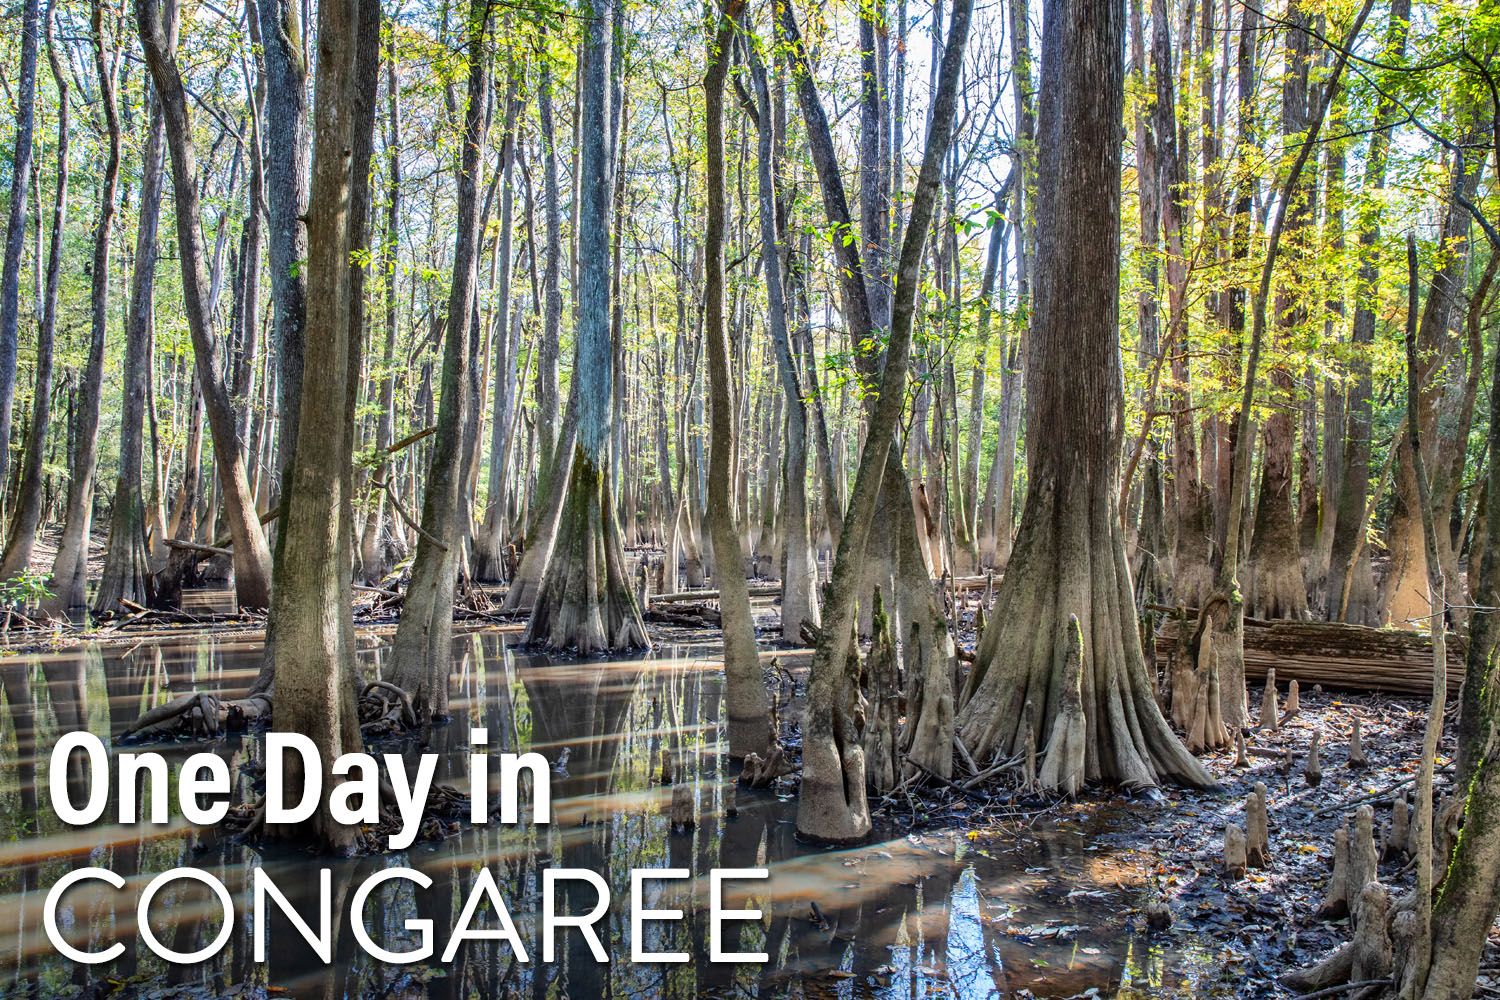 One Day in Congaree